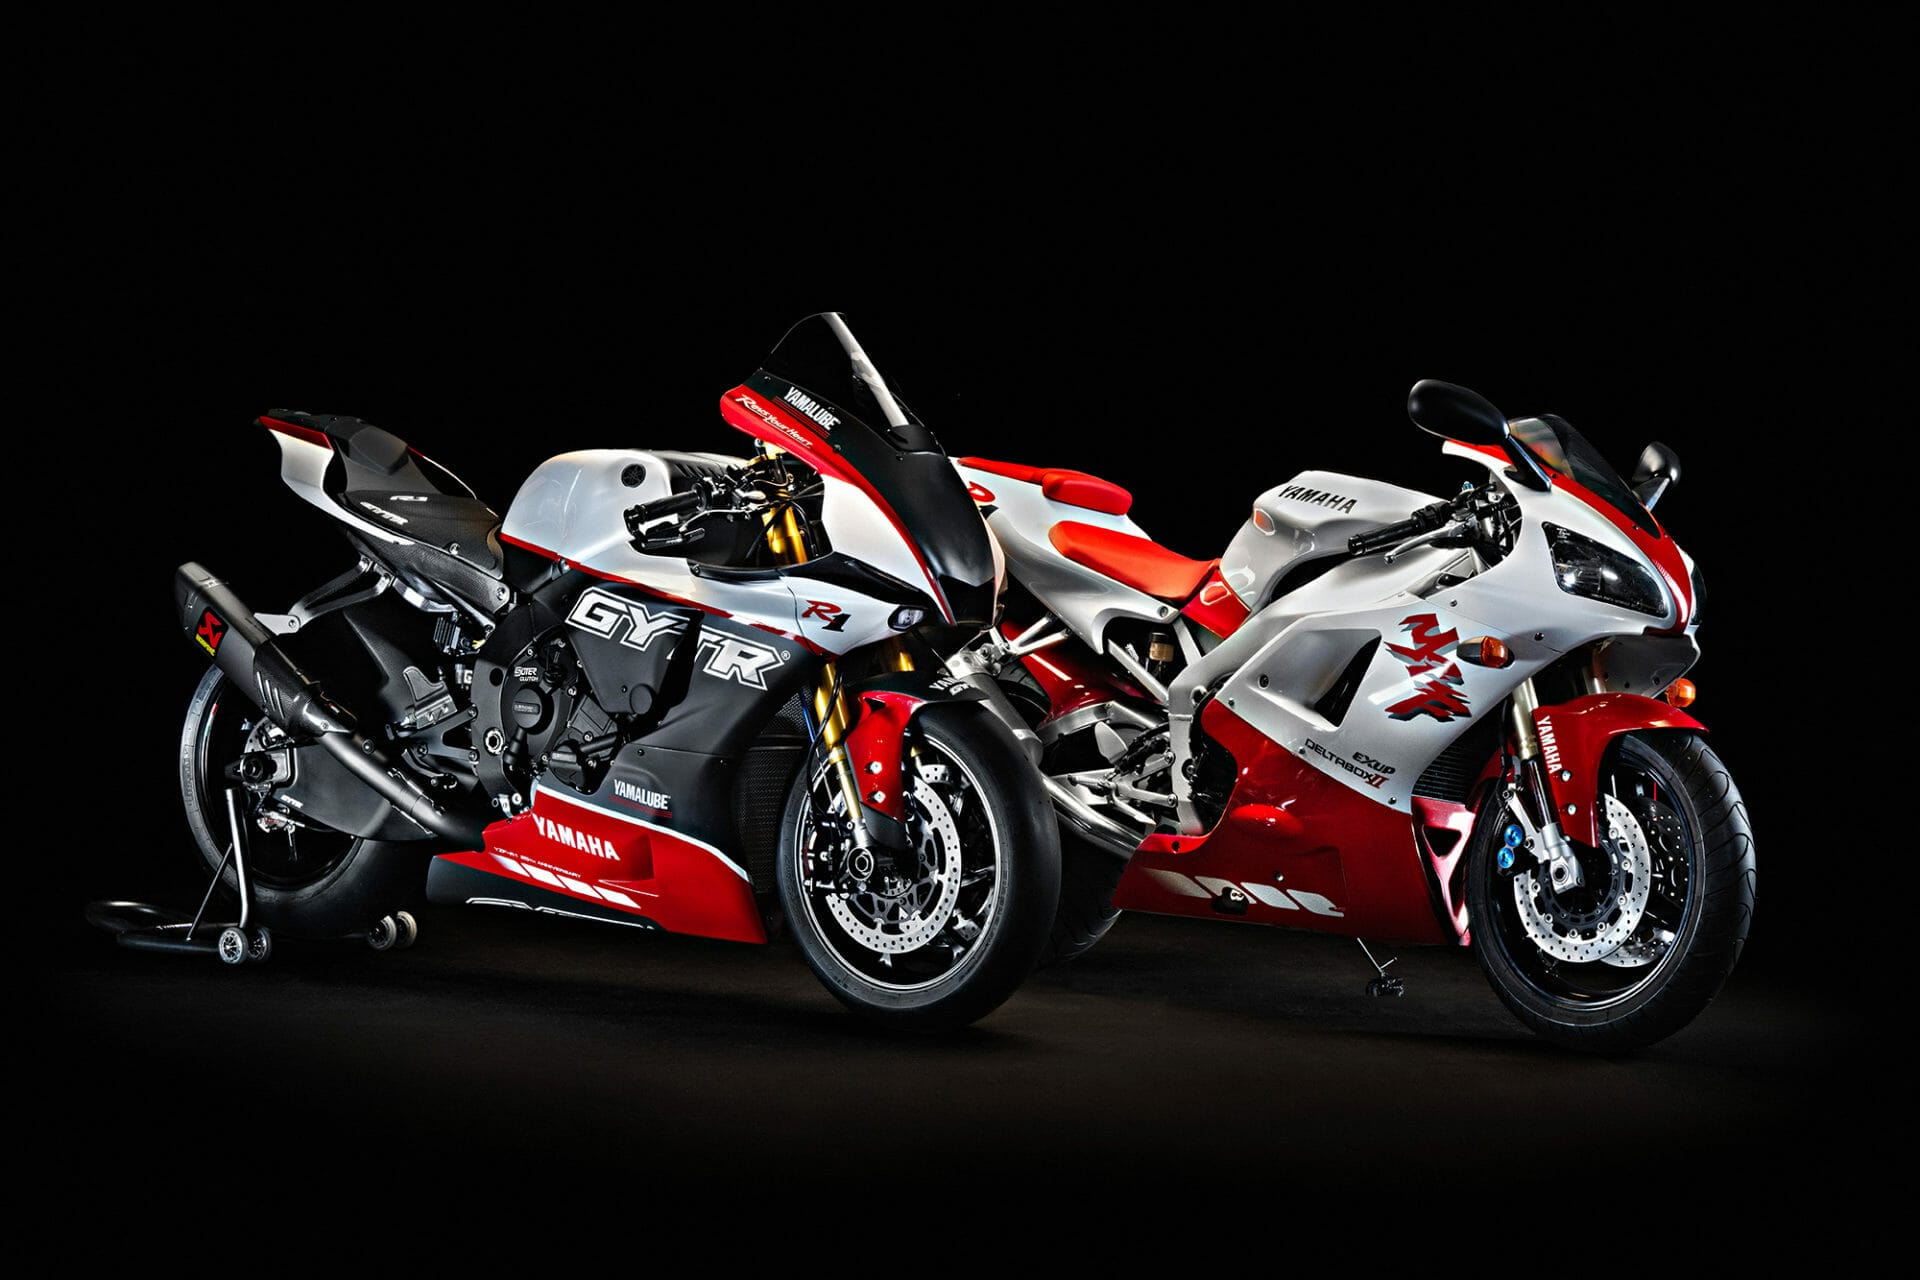 Yamaha R1 and R1M: From road racer to exclusive track bike